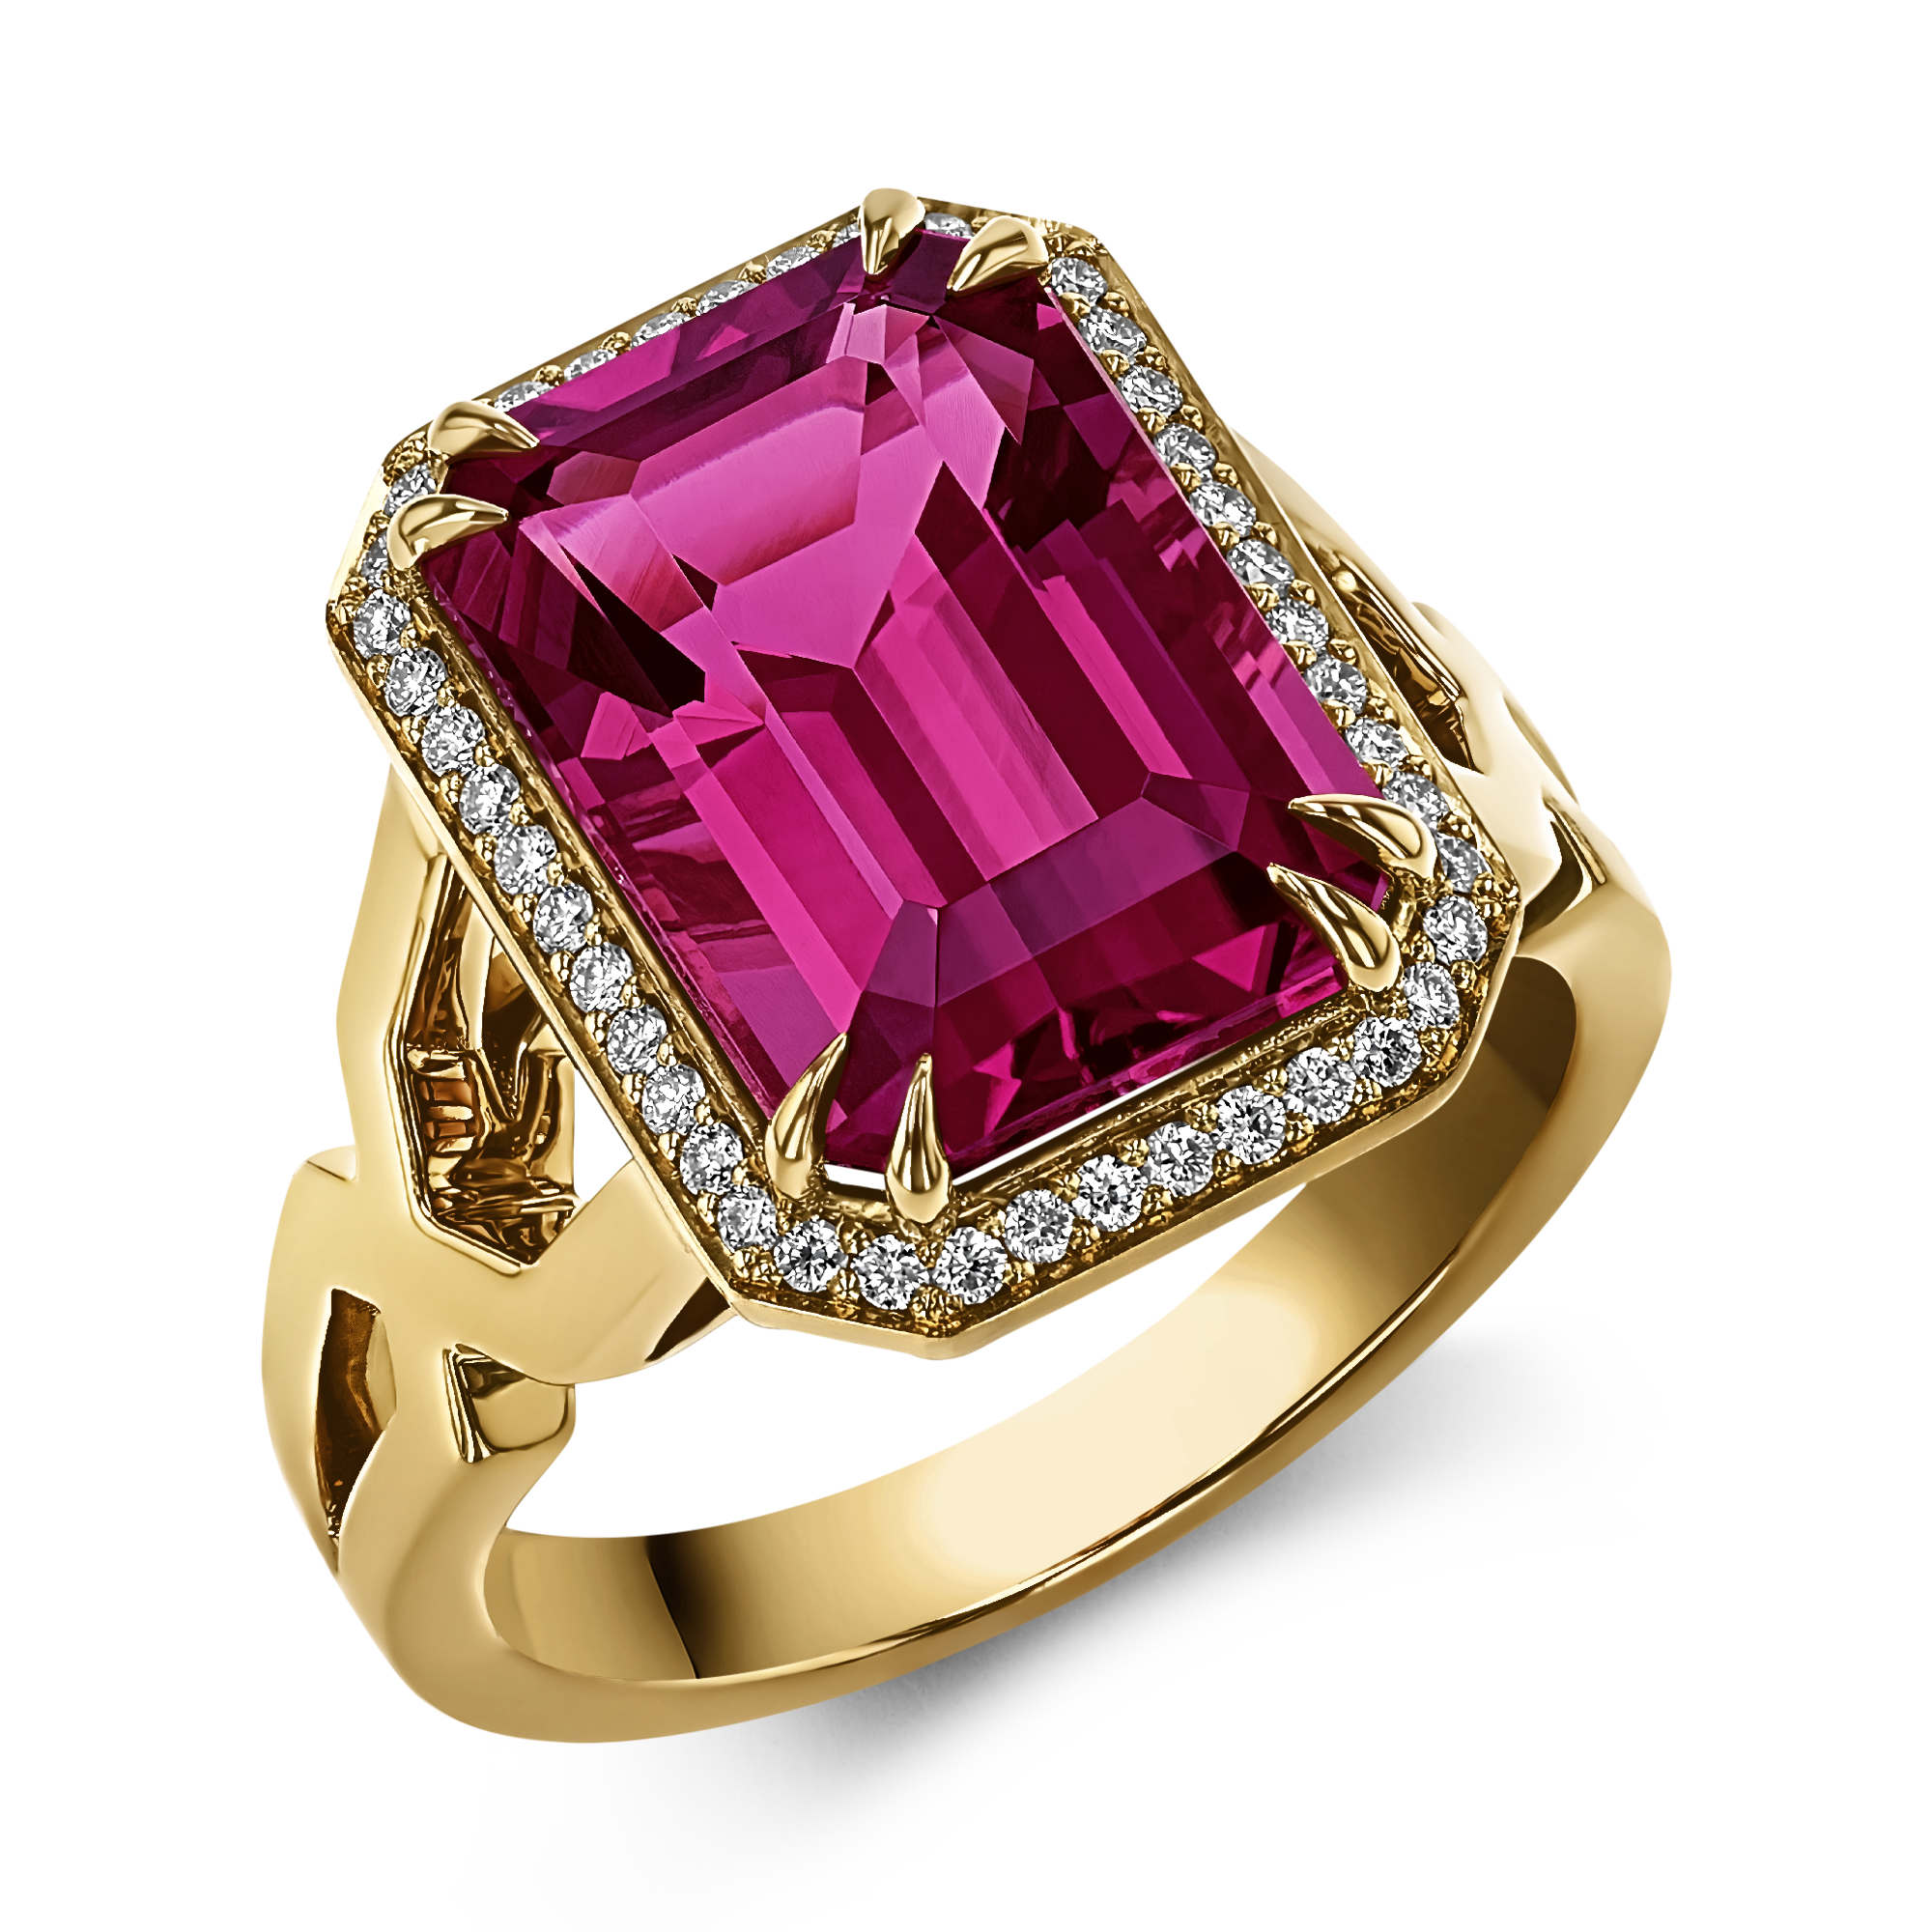 Pink Tourmaline and Diamond Ring Emerald Cut, Four Claw Set_1